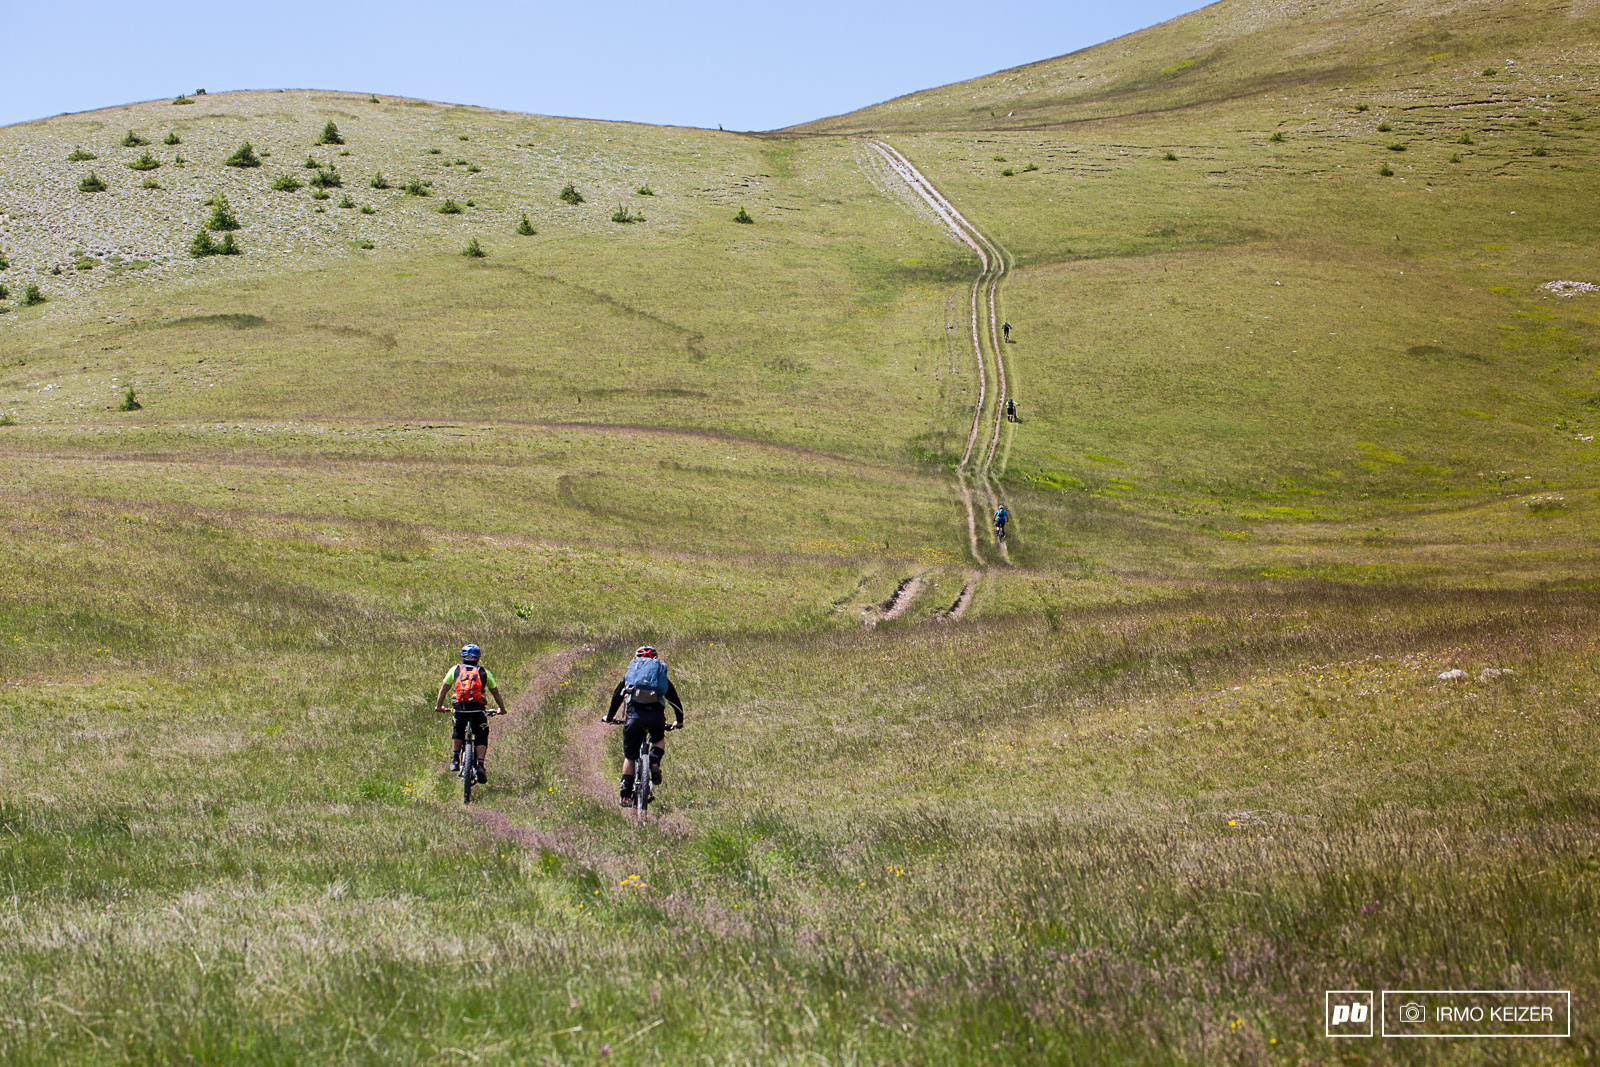 Never make the mistake of thinking the climb is finished. Rounding the corner, these riders face another fierce uphill after hours of sustained climbing by bike and on foot.